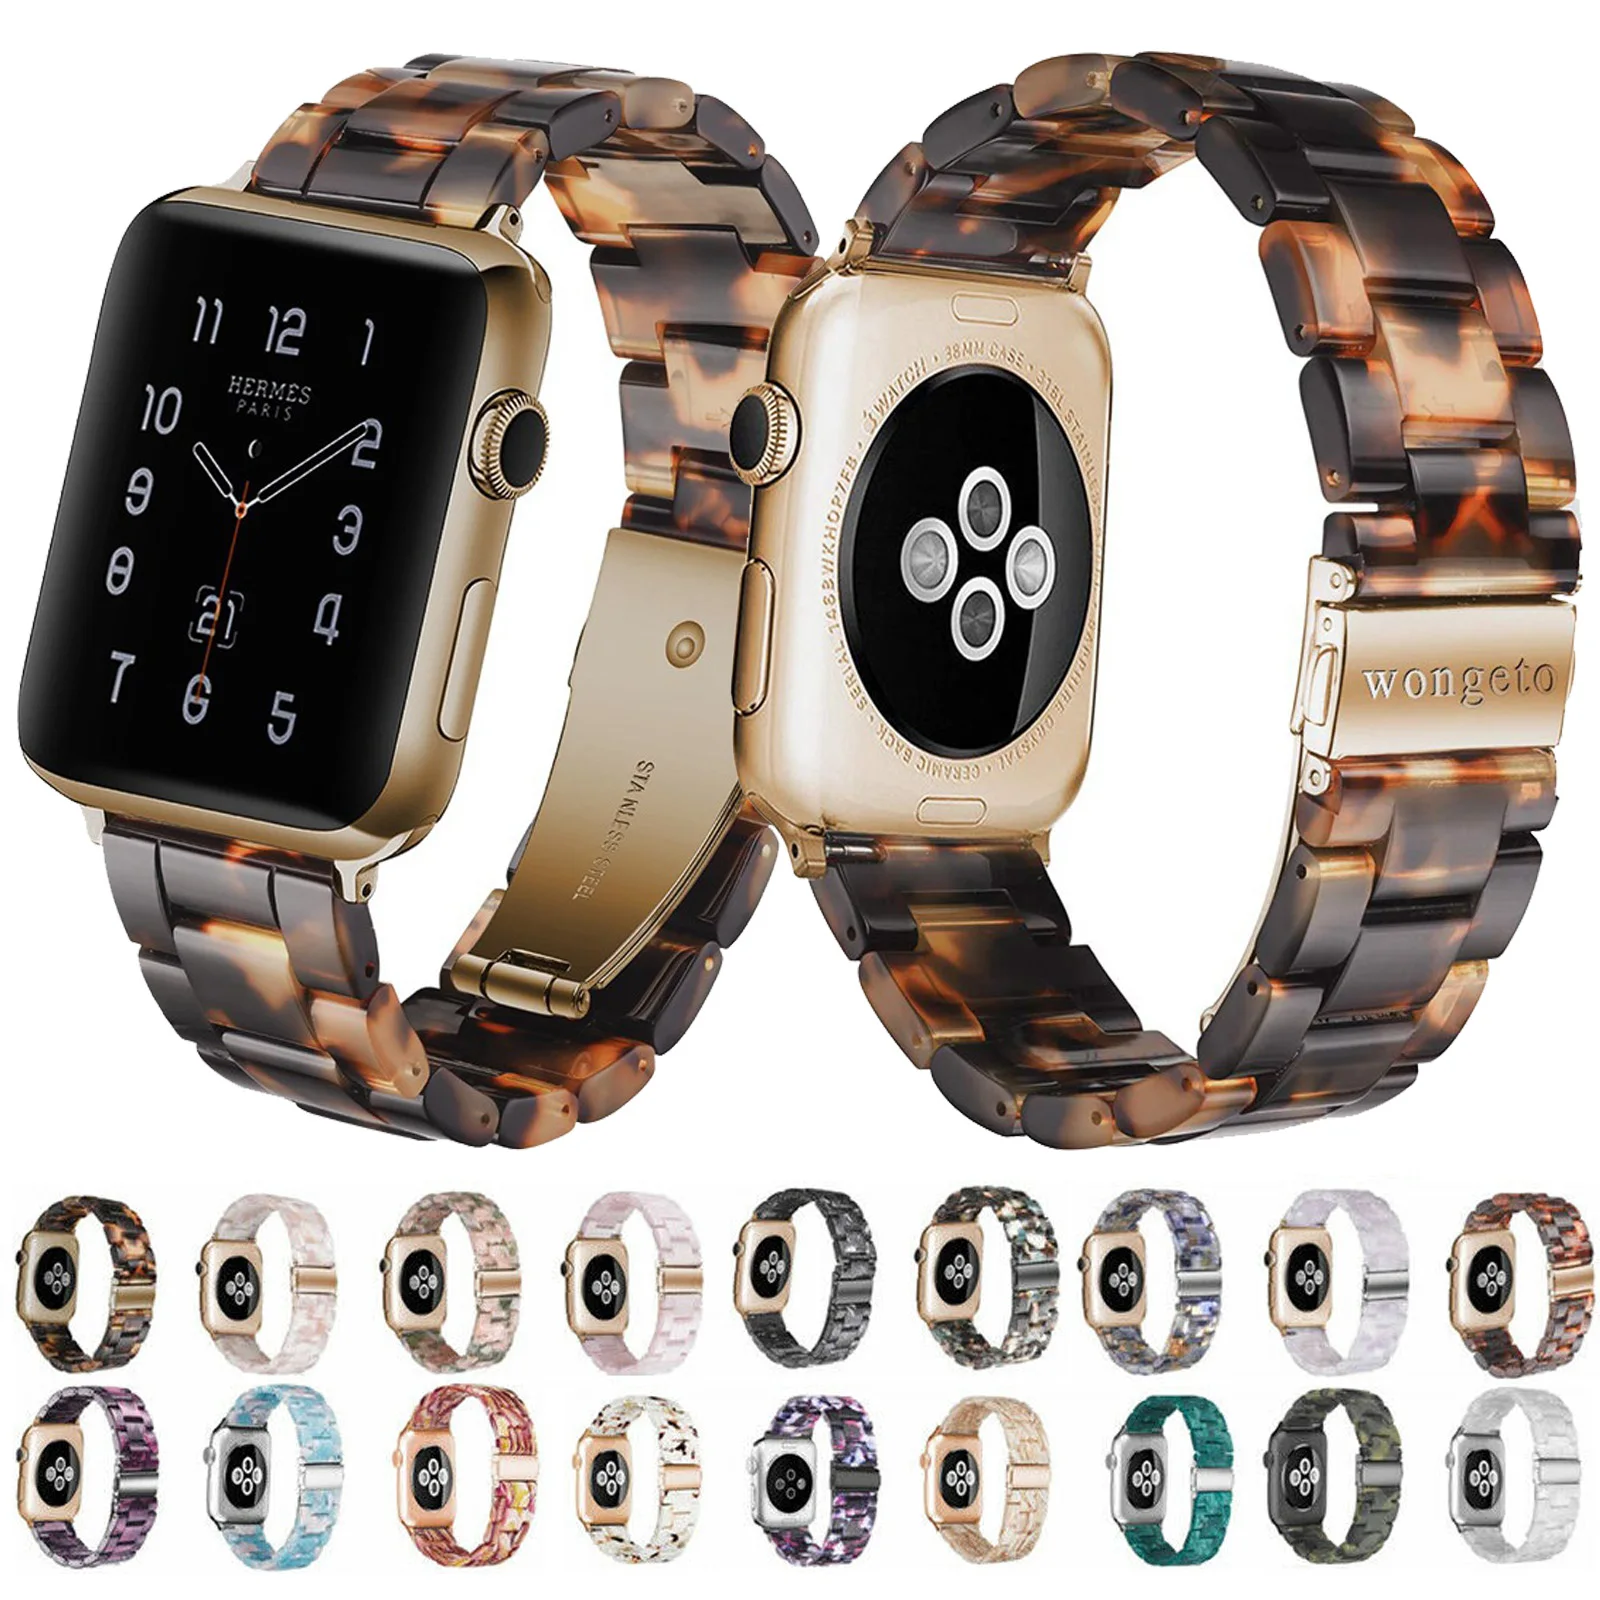 Resin Strap for Apple Watch 6 Band 44mm Wristband Replacement Bracelet for Iwatch Series SE 5 4 3 2 1 40mm 42mm 38mm Watchband